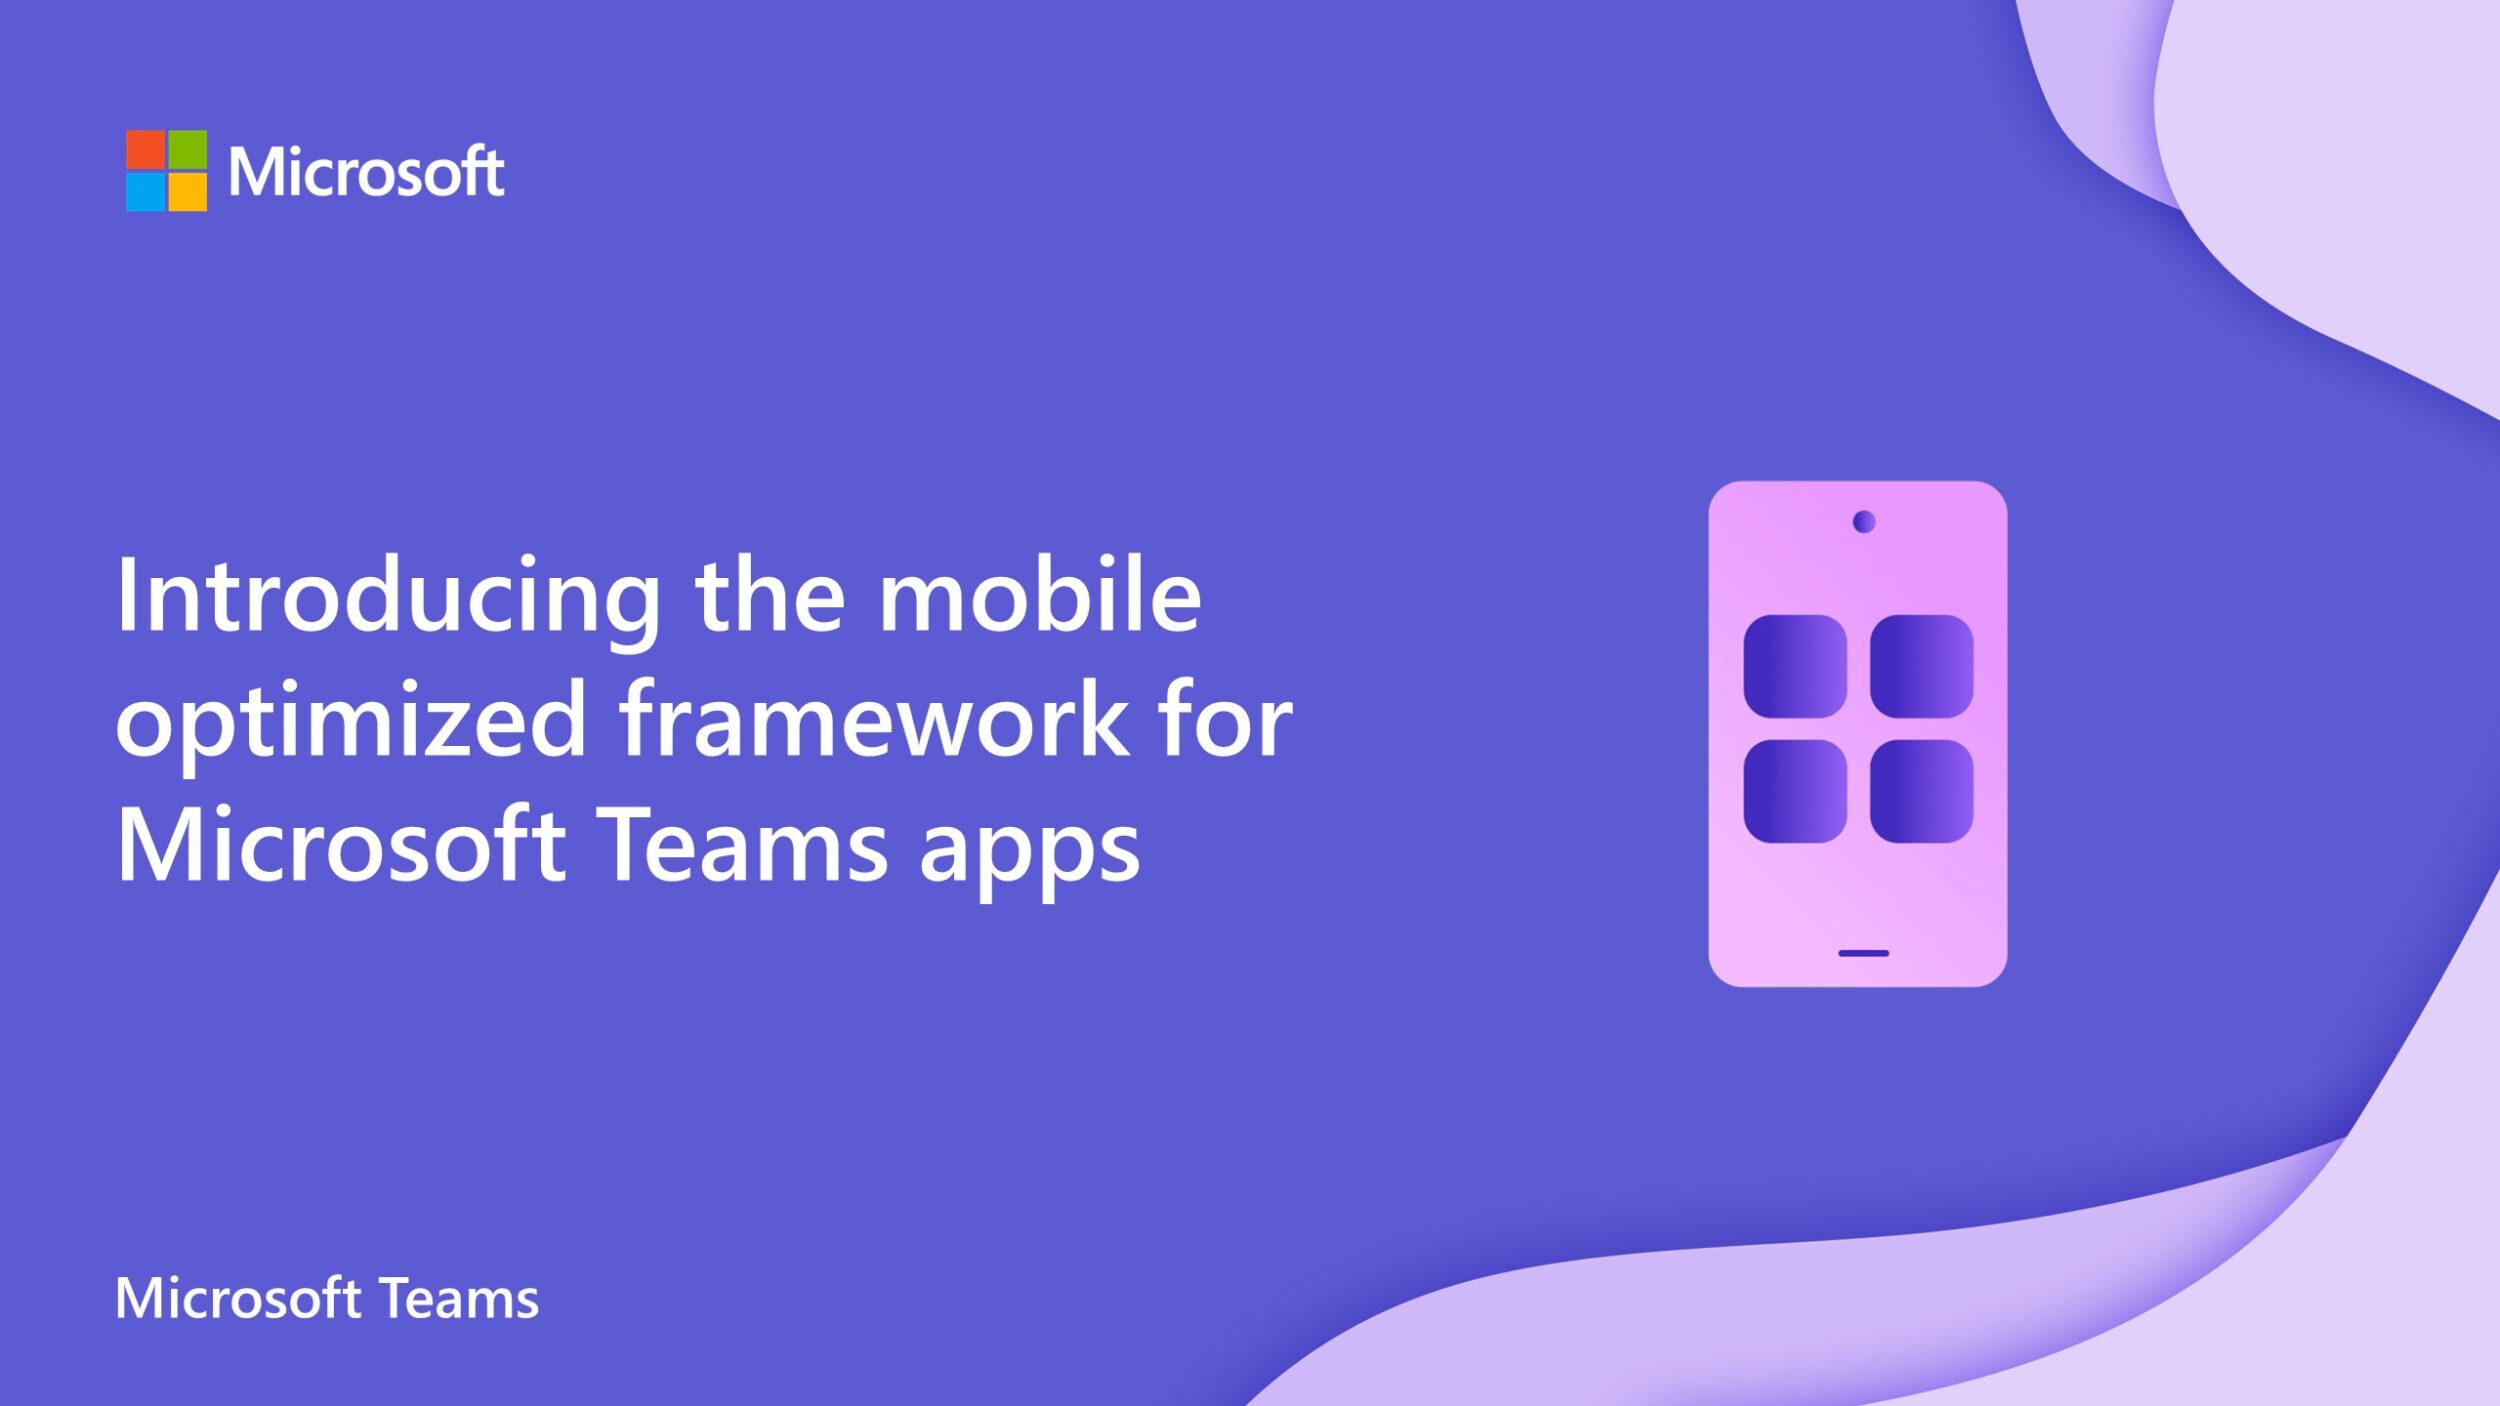 Introducing the mobile optimized framework for Microsoft Teams apps